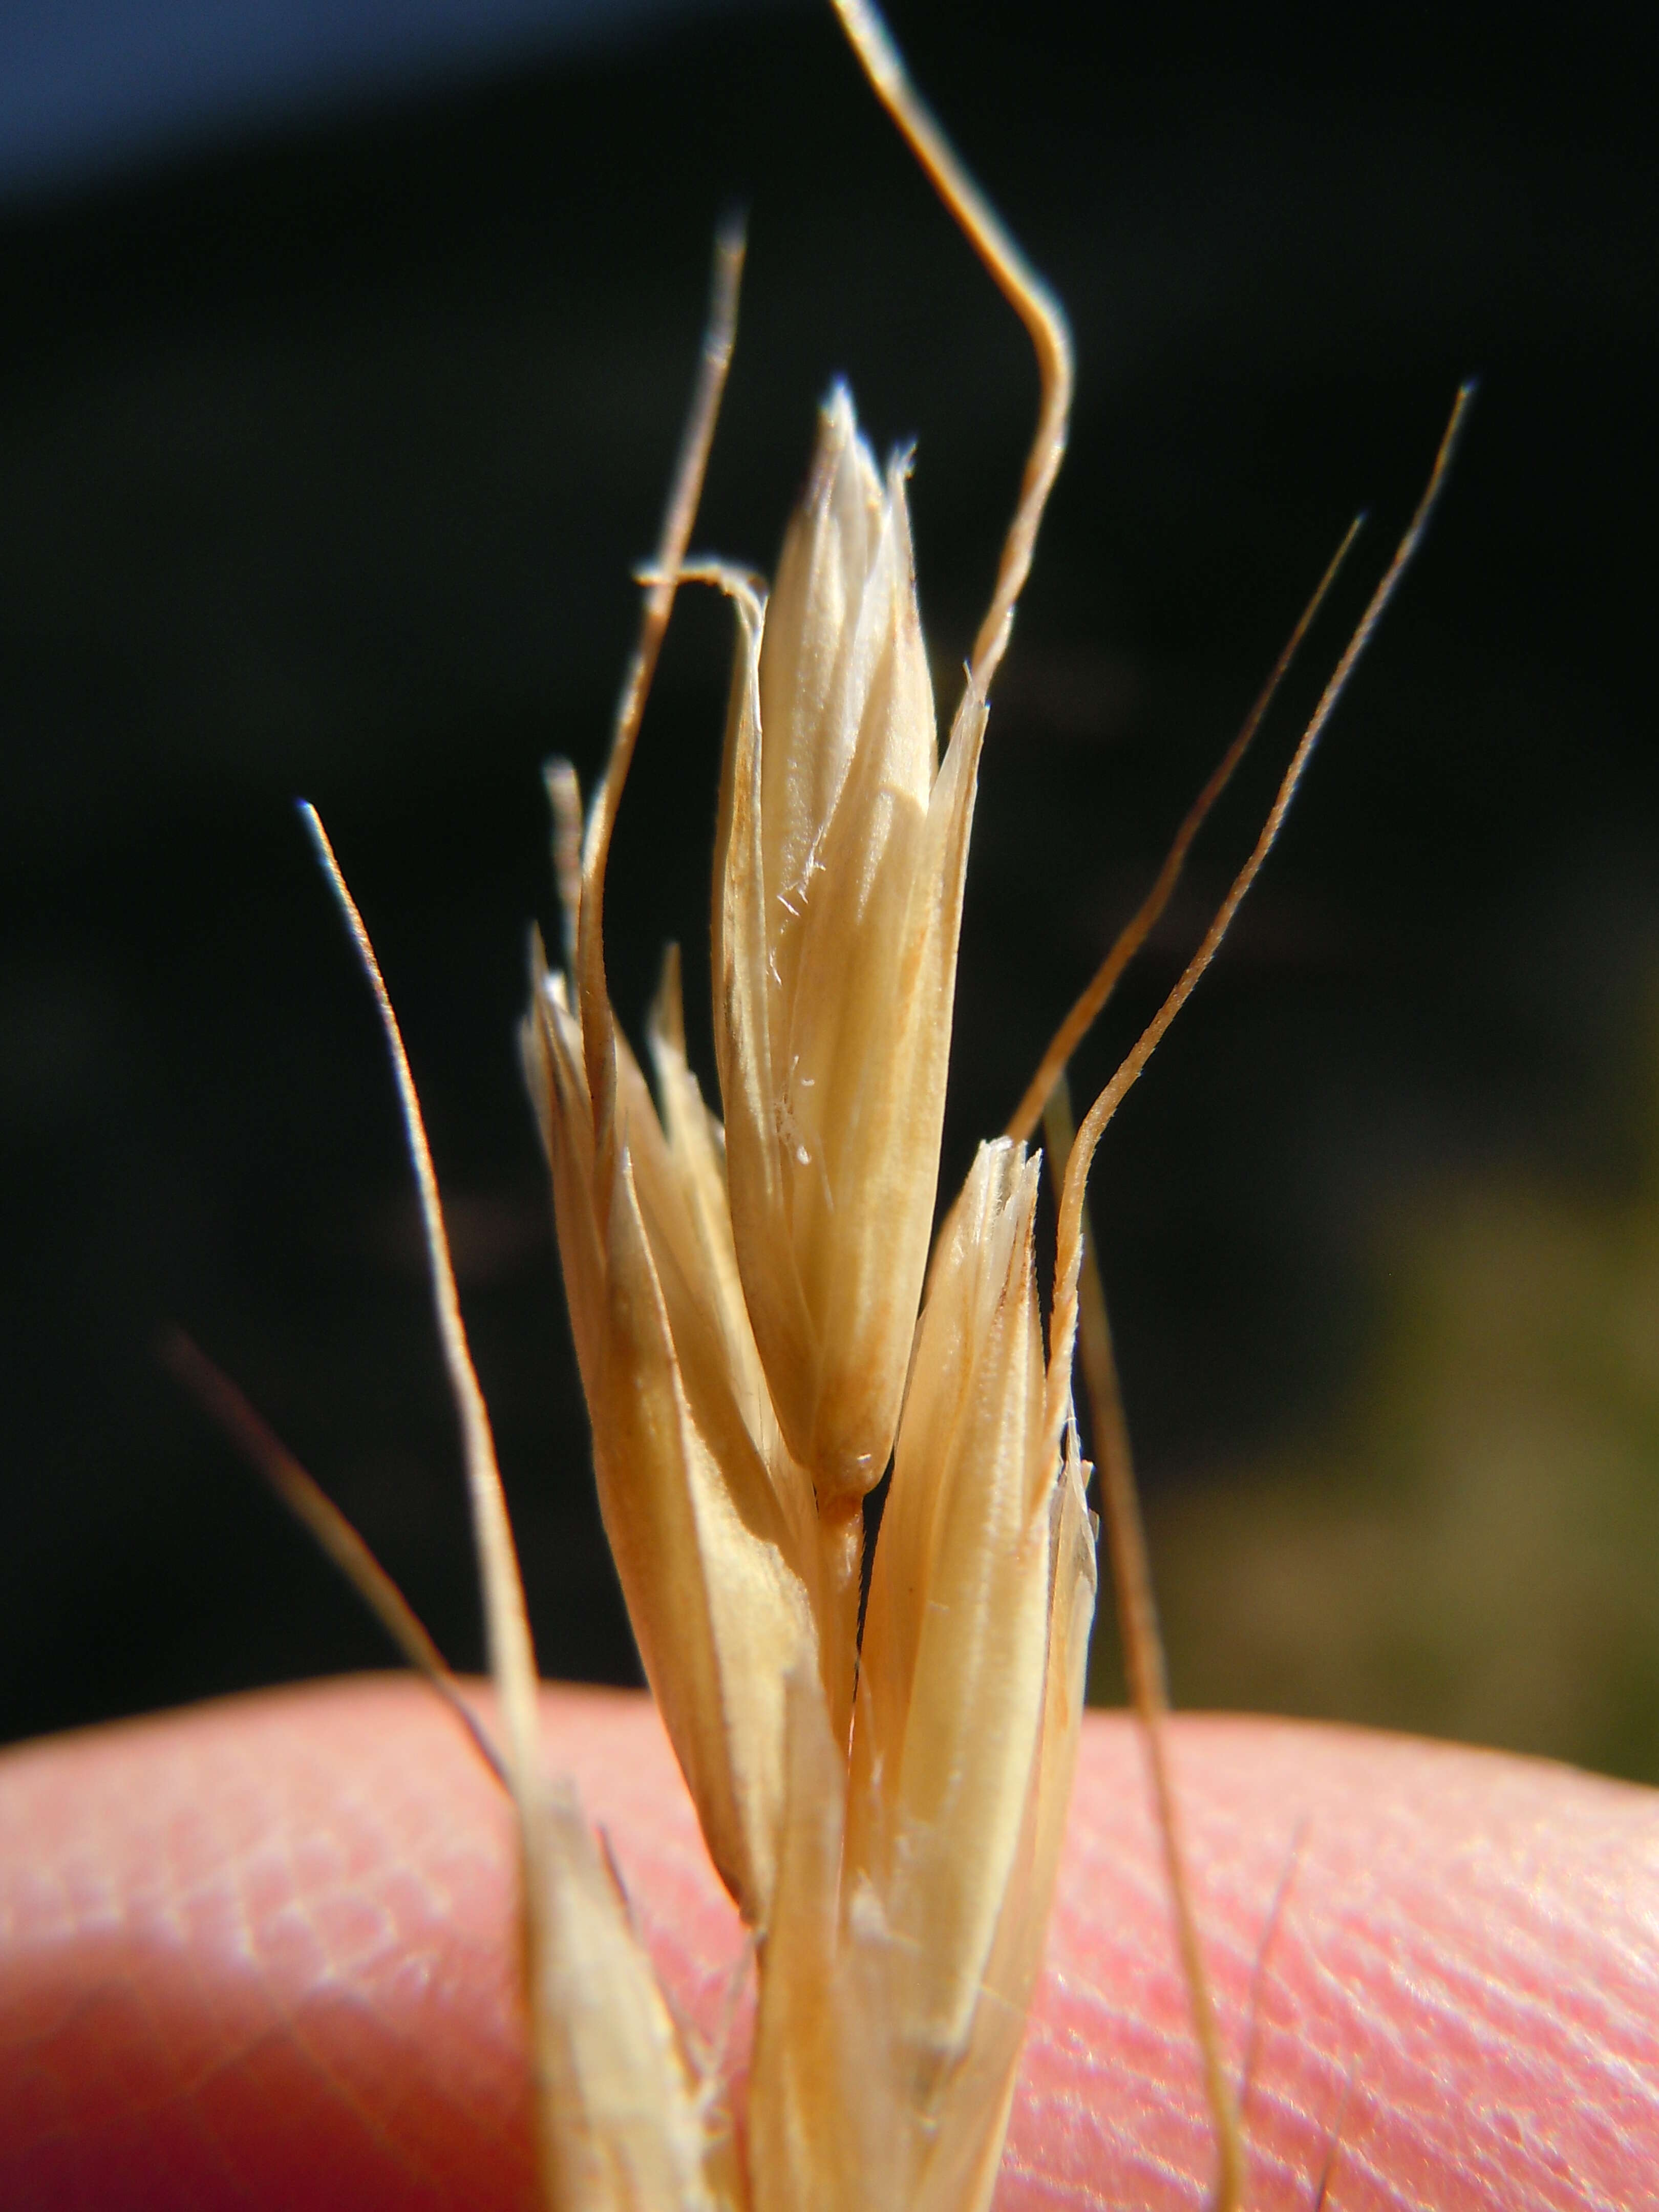 Image of blue oat grass